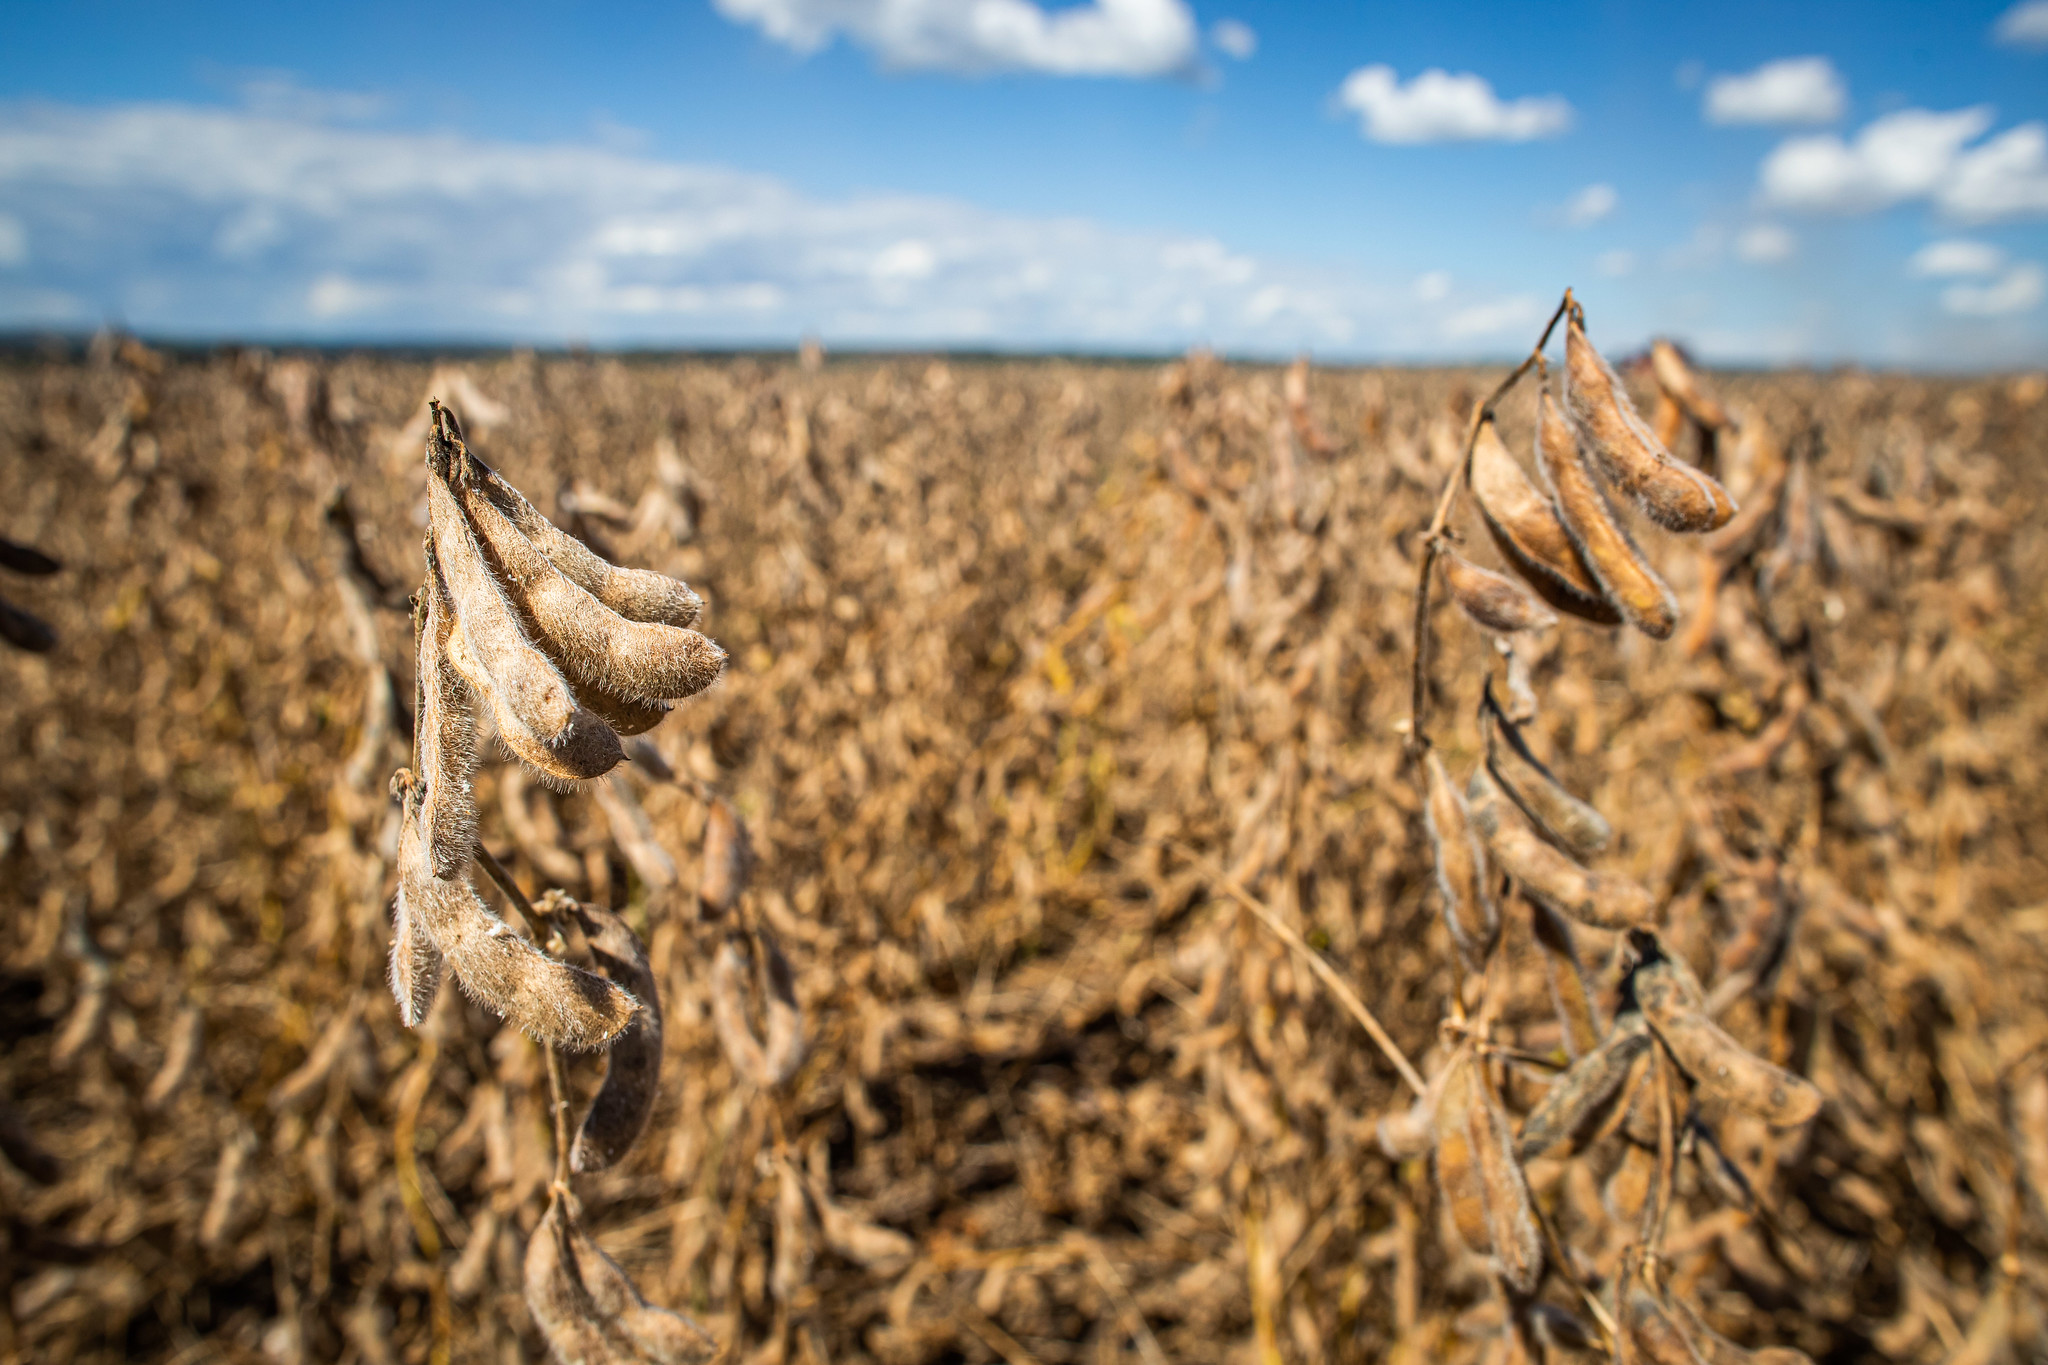 CNA and Embrapa discuss strategies for coping with drought in soybean crops